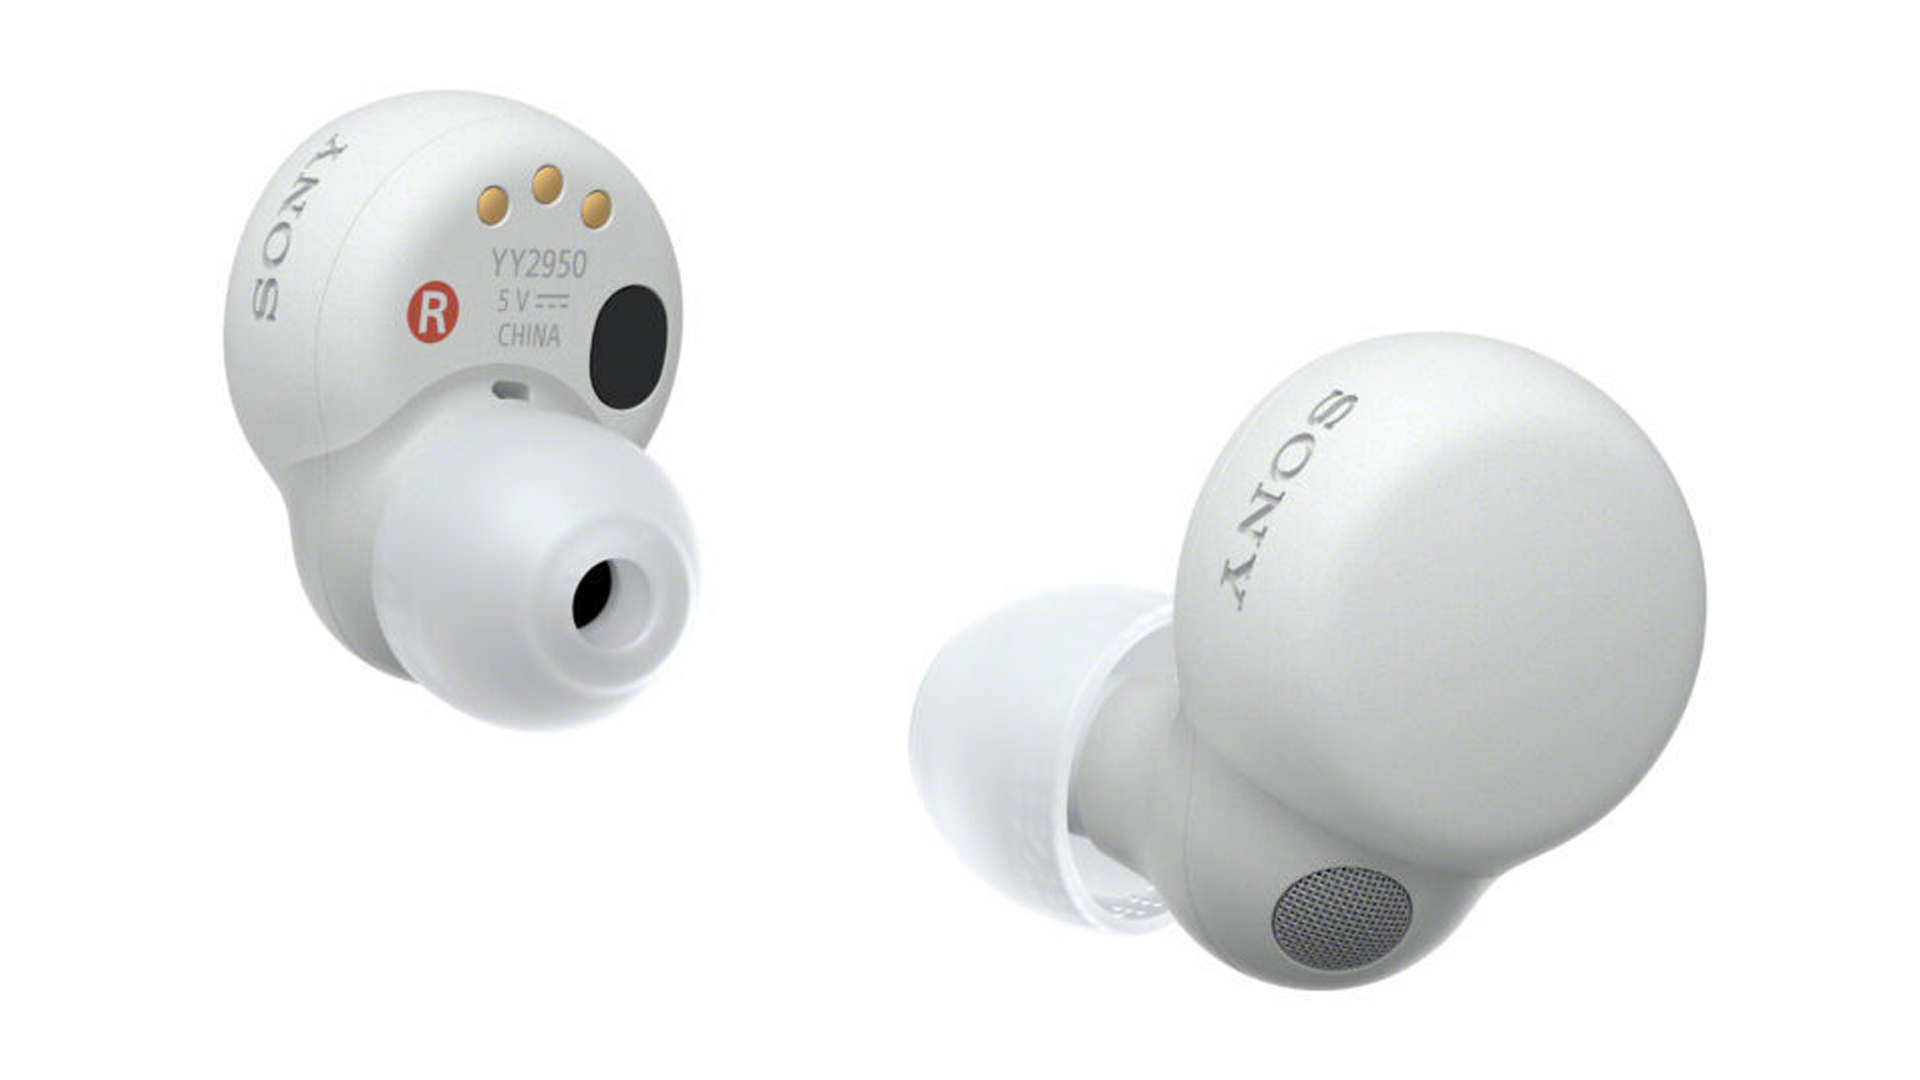 Sony LinkBuds S earbuds are pricey – but might be worth it